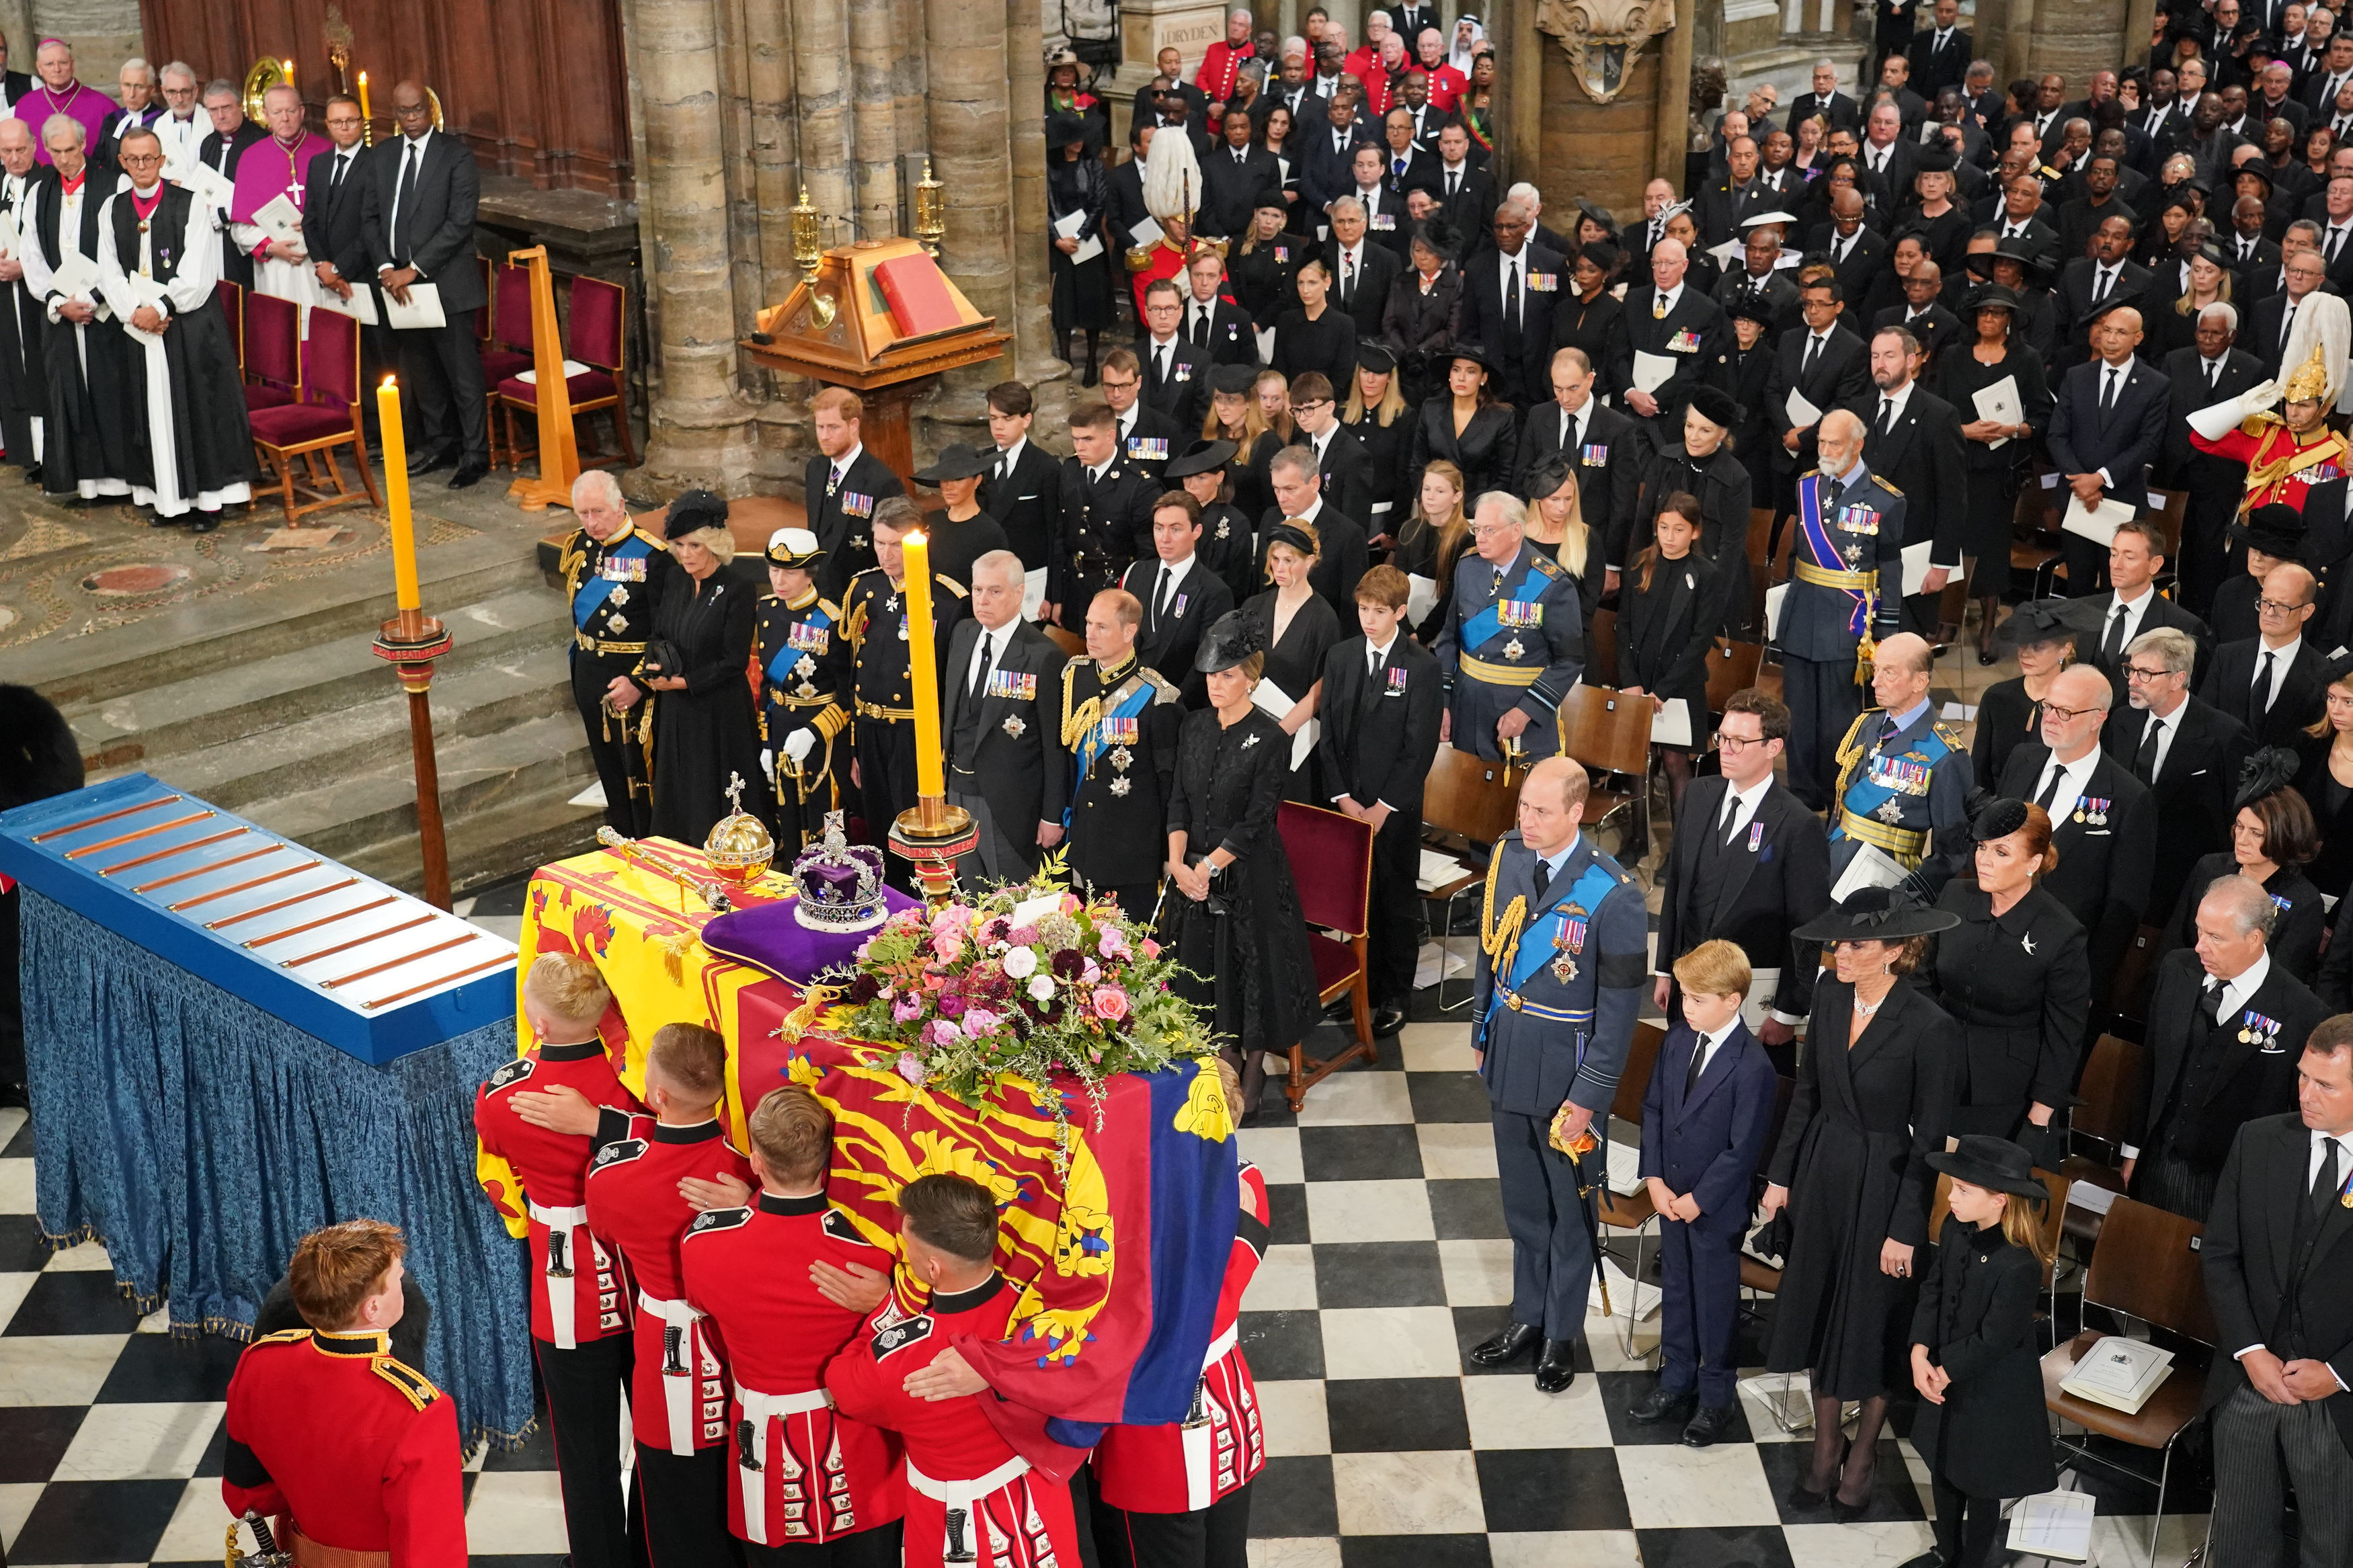 <p>The coffin of Queen Elizabeth II, draped in the Royal Standard with the Imperial State Crown and the Sovereign's Orb and Sceptre, was carried by a military bearer party inside Westminster Cathedral in London on Sept. 19, 2022, as the royal family looked on during <a href="https://www.wonderwall.com/celebrity/royals/best-photos-from-queen-elizabeth-ii-funeral-king-charles-princes-william-prince-harry-george-charlotte-kate-meghan652347.gallery">her state funeral</a>: (front row) King Charles III, Camilla, Queen Consort, Princess Anne, Vice Admiral Sir Tim Laurence, Prince Andrew Prince Edward, Sophie, Countess of Wessex, Prince William, Prince George, Princess Kate, Princess Charlotte and Peter Phillips; (second row) Prince Harry, Duchess Meghan, Princess Beatrice, Edoardo Mapelli Mozzi and Lady Louise Windsor, James, Viscount Severn, Jack Brooksbank, Princess Eugenie, Sarah, Duchess of York, David Armstrong-Jones, the Earl of Snowdon; (third row) Samuel Chatto, Arthur Chatto, Lady Sarah Chatto, Daniel Chatto, the Duke of Gloucester, the Duke of Kent, the Earl and Countess of St. Andrews. </p>